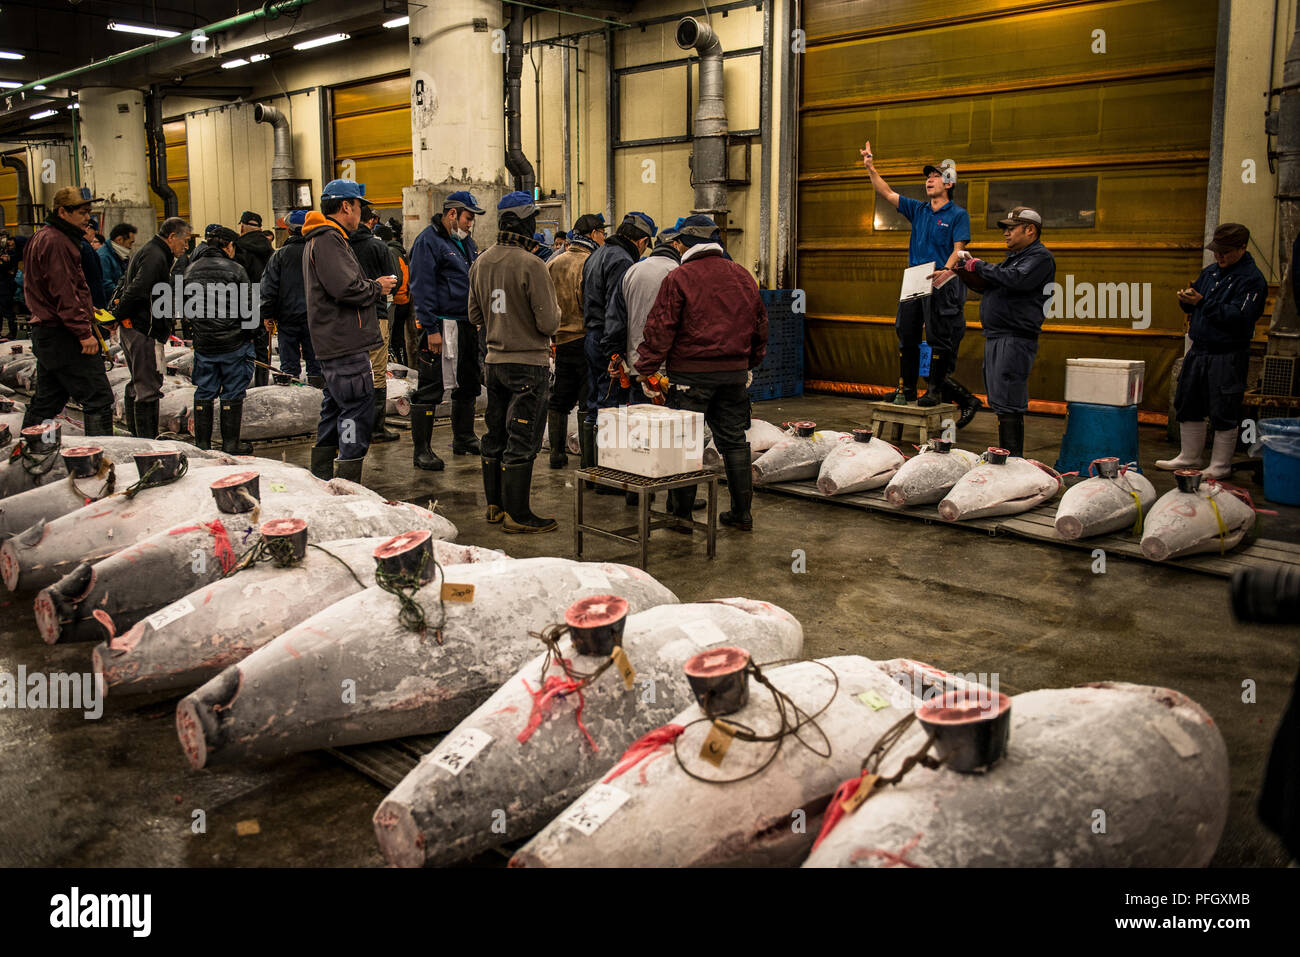 Tuna auction taking place very early in the morning at Tsukiji Fish Market, Tokyo, Japan, with frozen tuna in the foreground Stock Photo